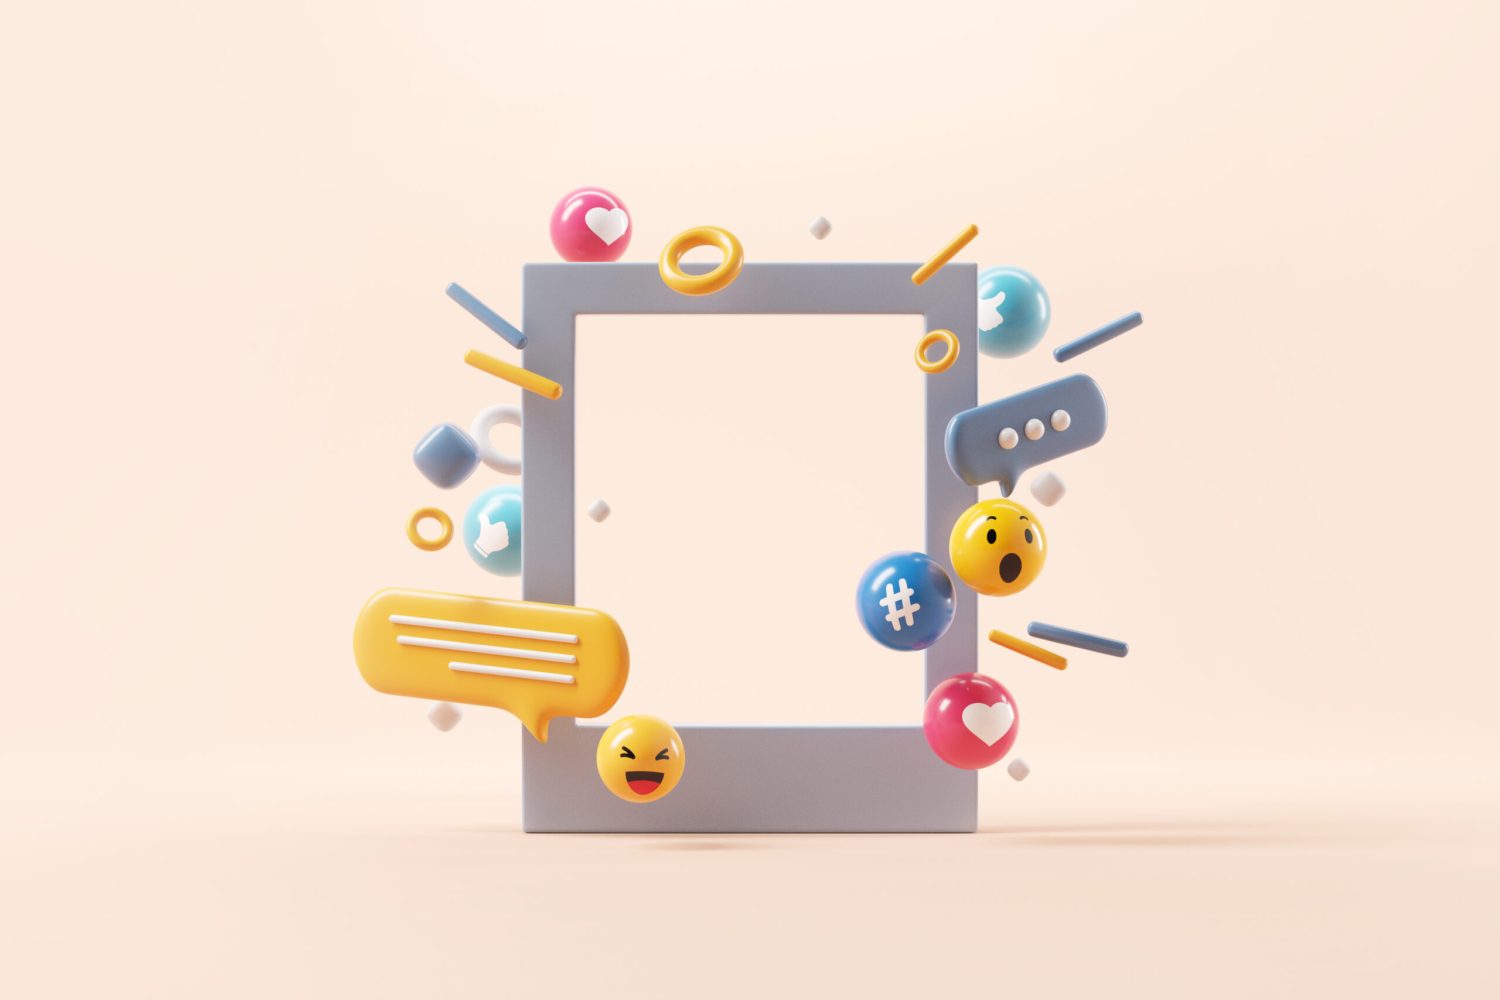 Abstract frame with media and technology with love, like, comment icon, 3d render.